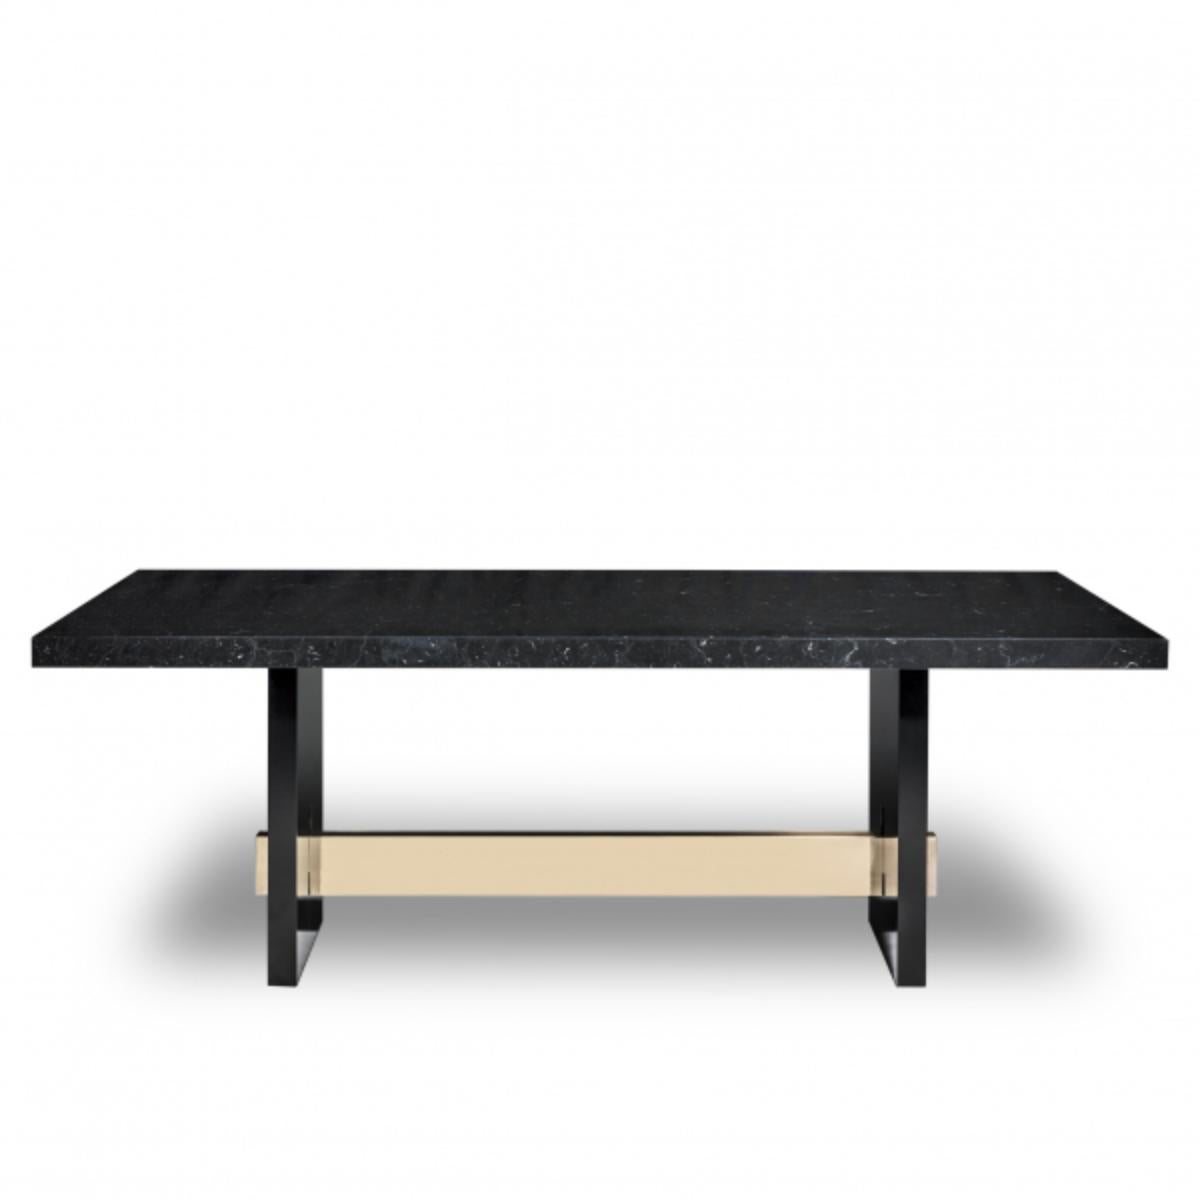 Marble Geometry Table by DUISTT 
Dimensions: W 210 x D 110 x H 78 cm
Materials: Nero Marquina Marble, Sikomoro Wood, Brass

GEOMETRY marble table combines the luxury of the Nero Marquina marble with the strong geometric lines of the table legs. It